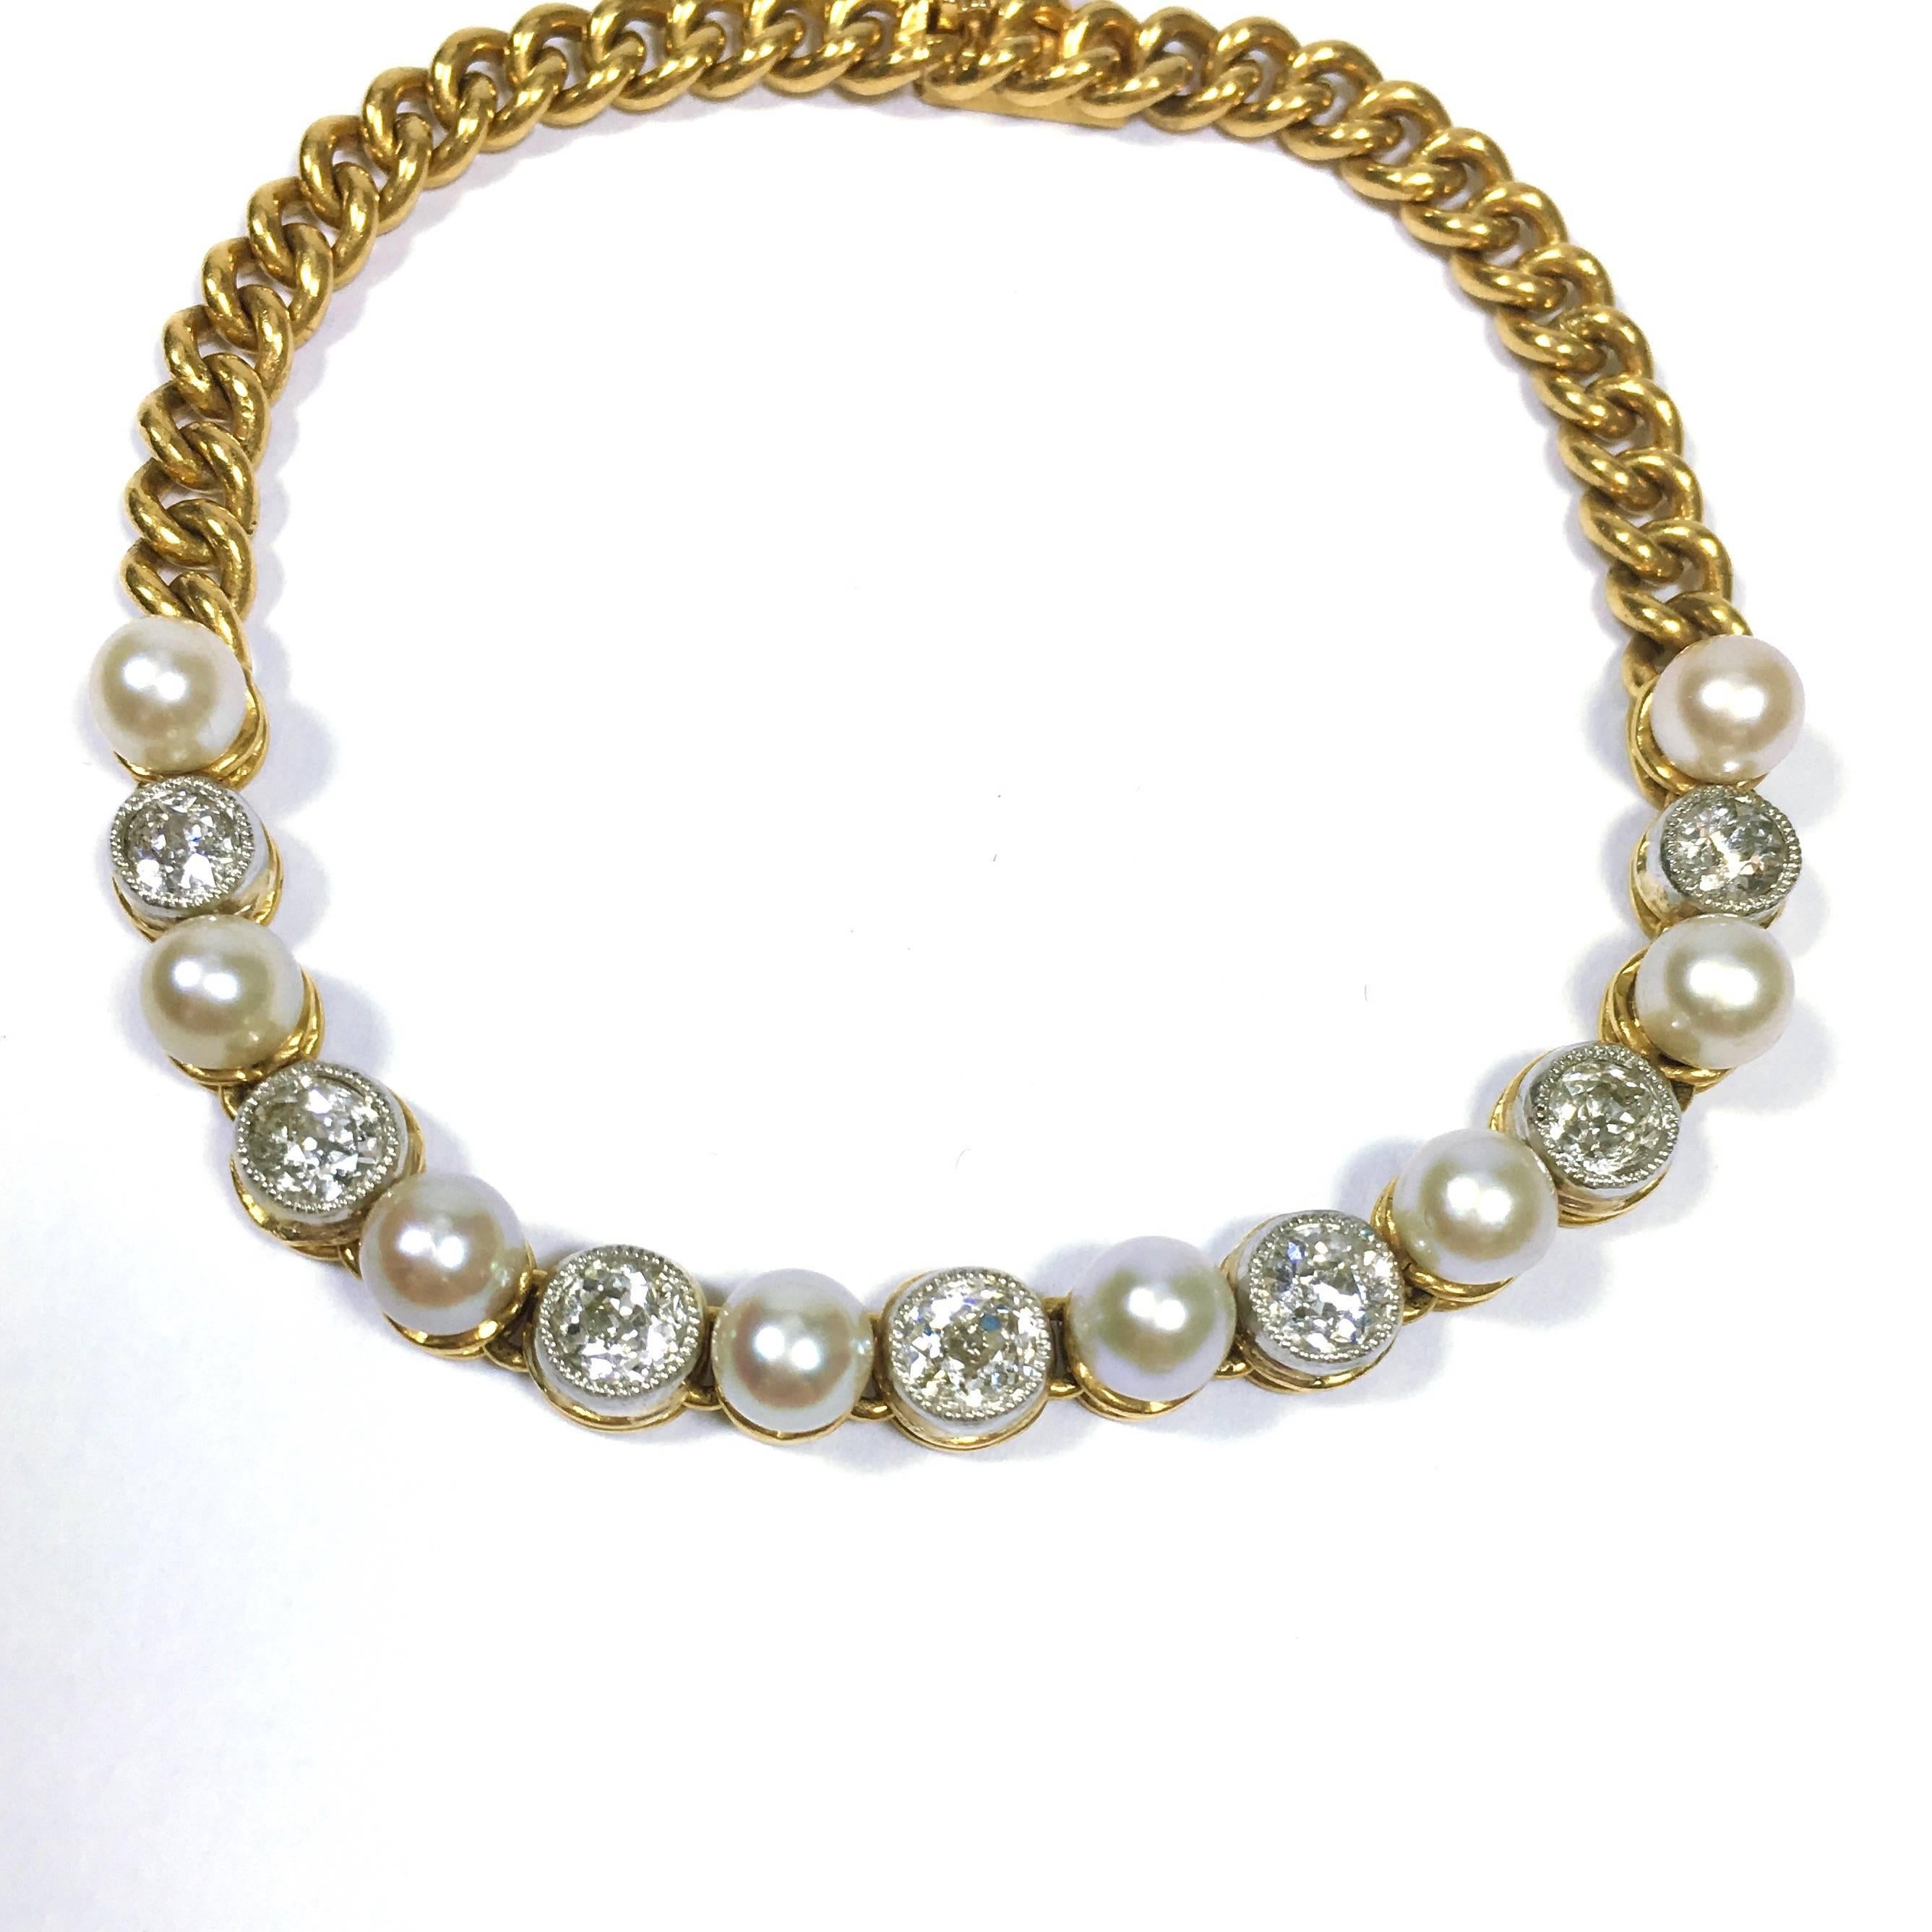 Late 19th century 18K yellow gold bracelet, featuring eight GIA certified natural pearls and seven round diamonds set in platinum, approximate total weight of 7 stones: 1.75ct. 
Length: 6.5